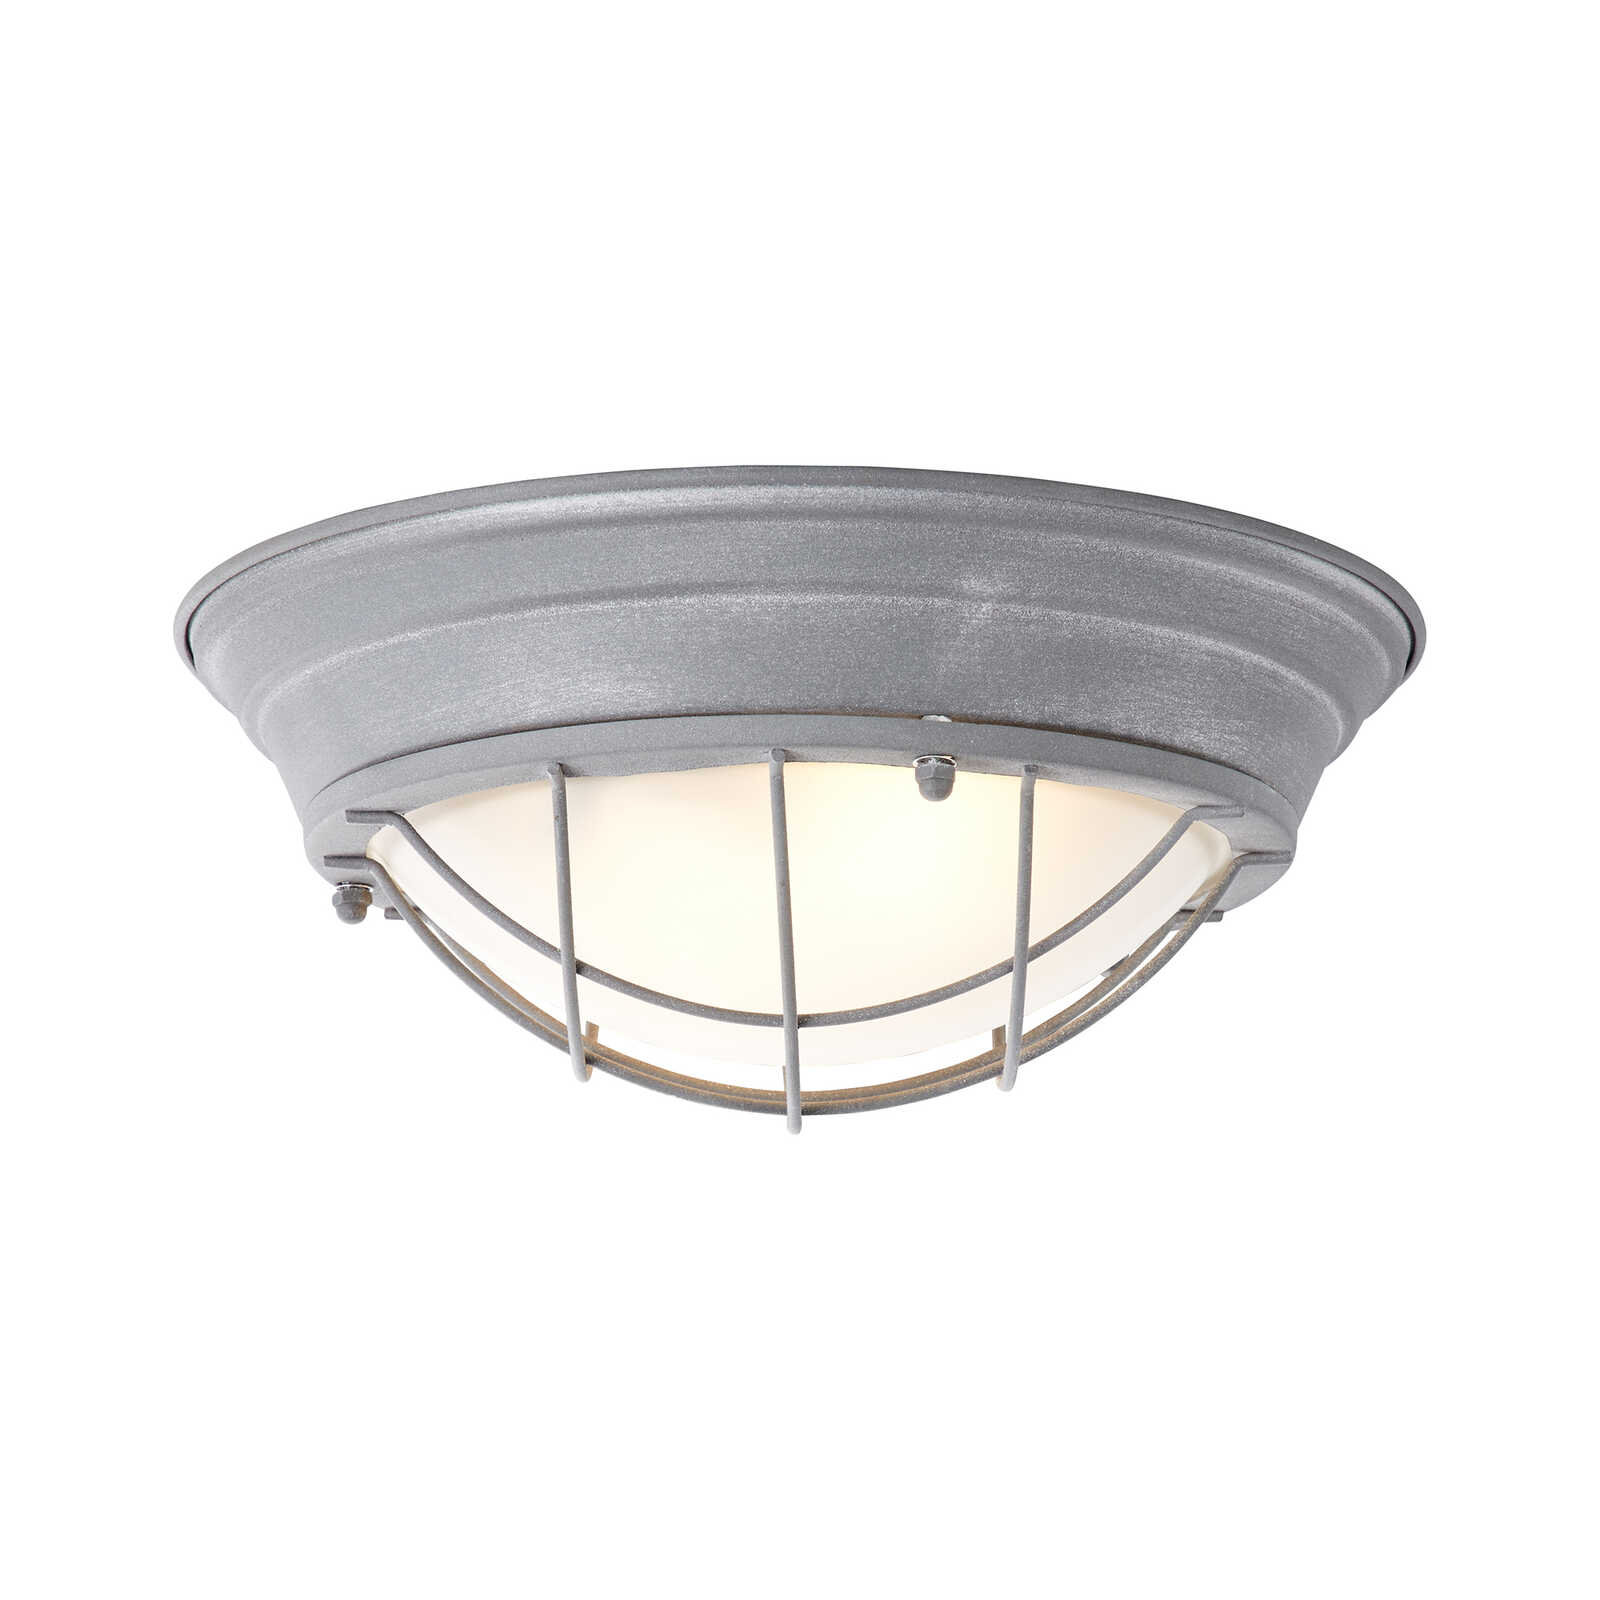 Glass wall and ceiling light - Sina 3 - Grey
